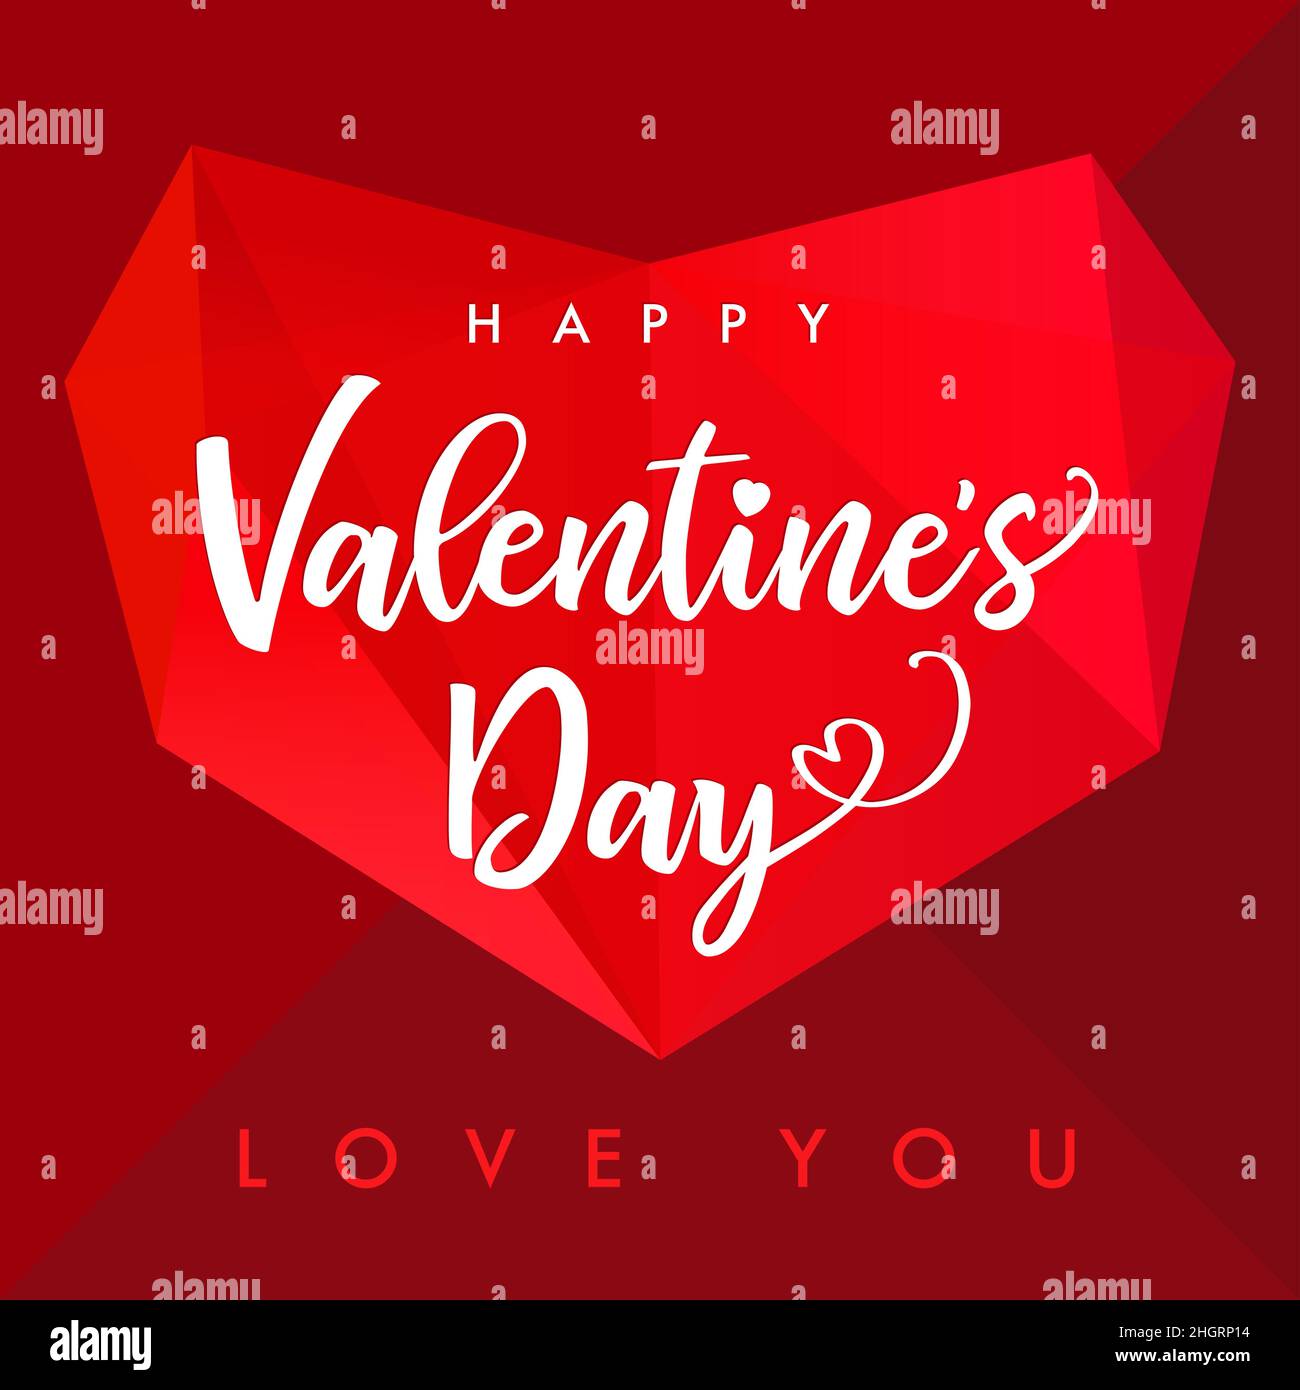 Happy Valentine's Day greeting card concept. Stained-glass 3D style red colored heart shape icon. Internet button idea. Isolated abstract graphic desi Stock Vector